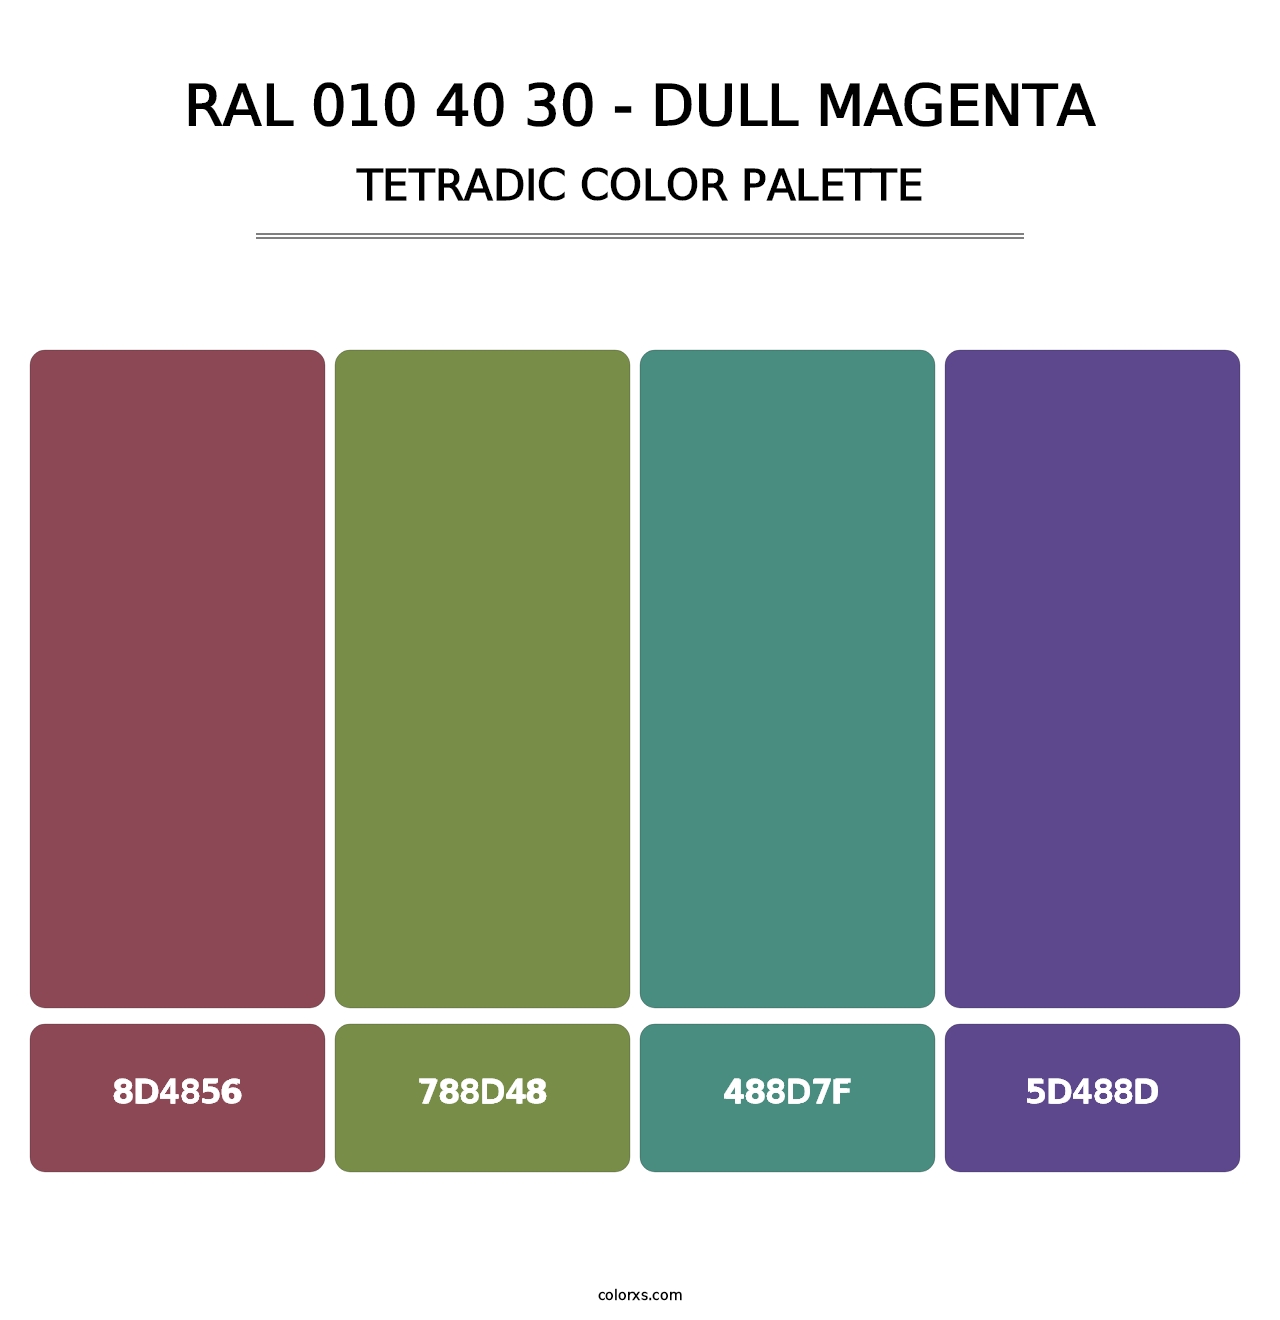 RAL 010 40 30 - Dull Magenta - Tetradic Color Palette